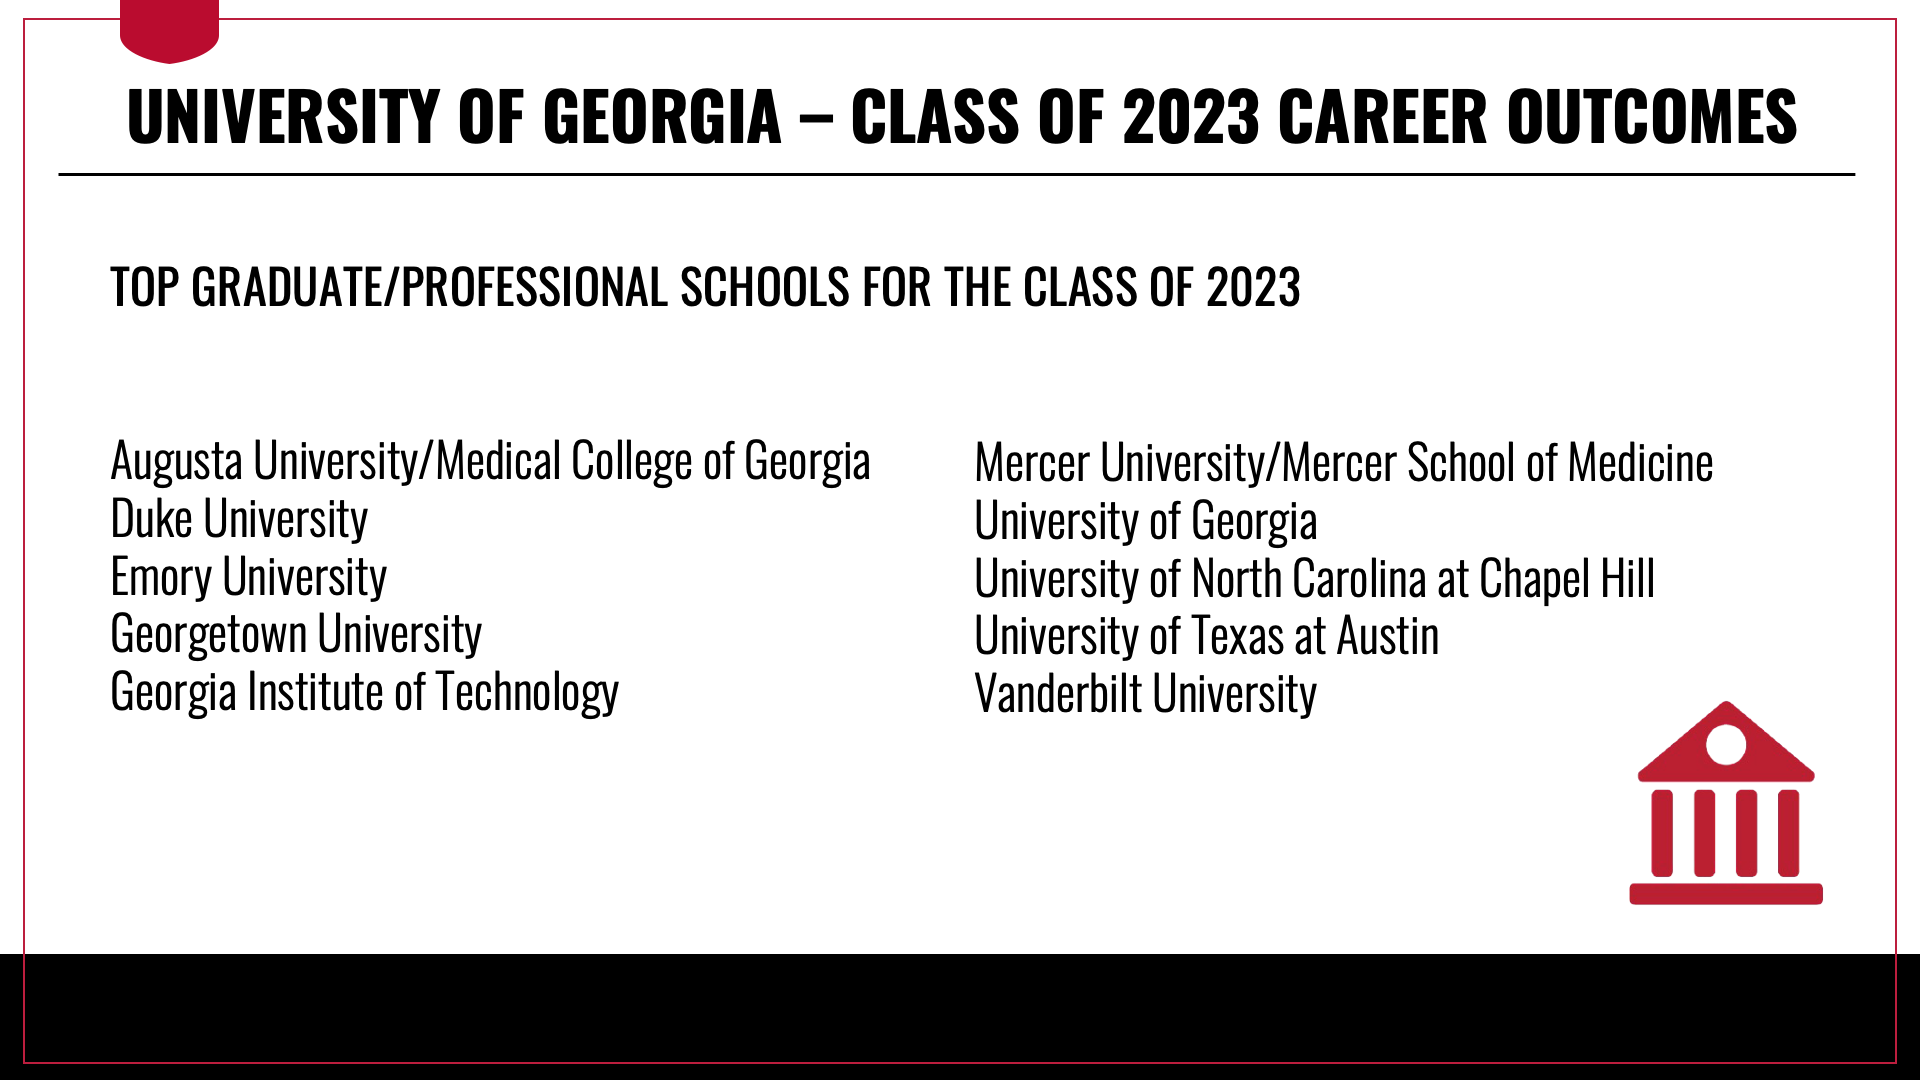 Top graduate and professional schools at which UGA Class of 2023 graduates have enrolled include Augusta University/Medical College of Georgia, Duke University, Emory University, Georgetown University, Georgia Institute of Technology, Mercer University/Mercer School of Medicine, University of Georgia, University of North Carolina at Chapel Hill, University of Texas at Austin, and Vanderbilt University